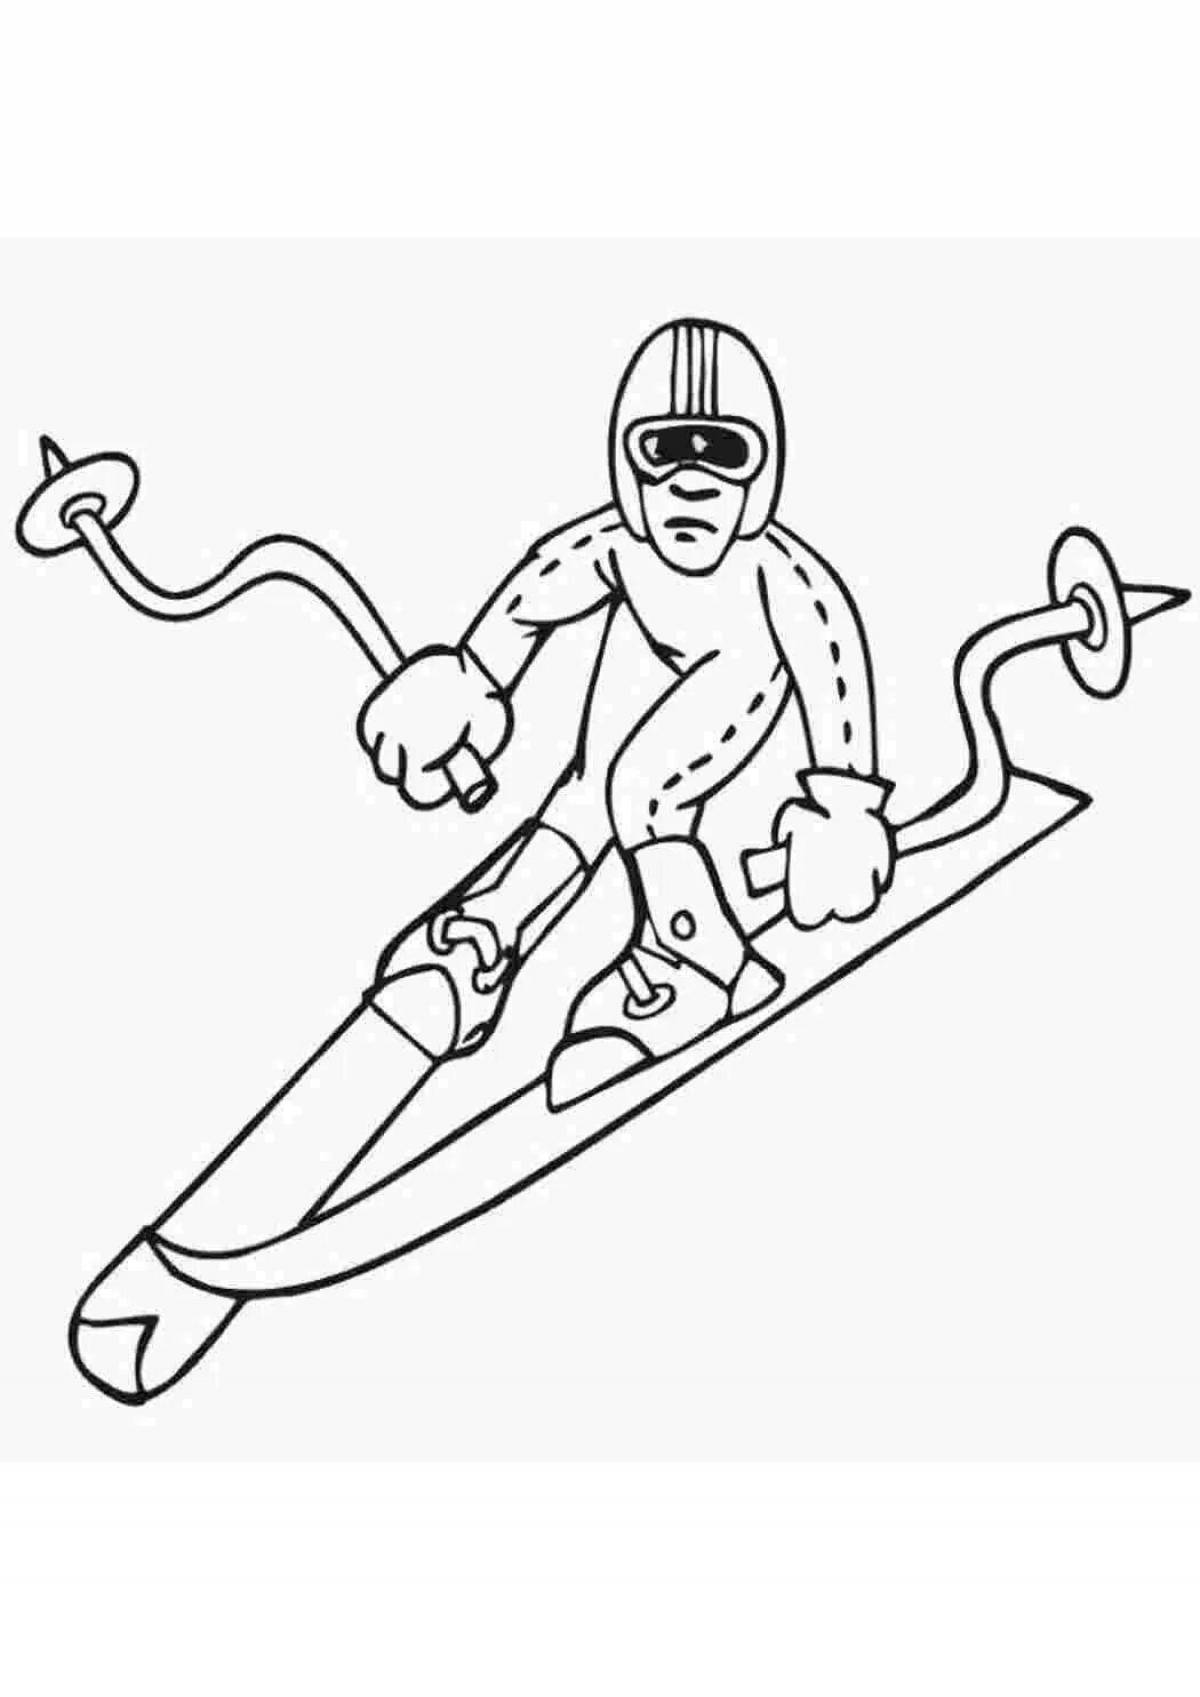 Inspirational coloring book for children's olympic sports